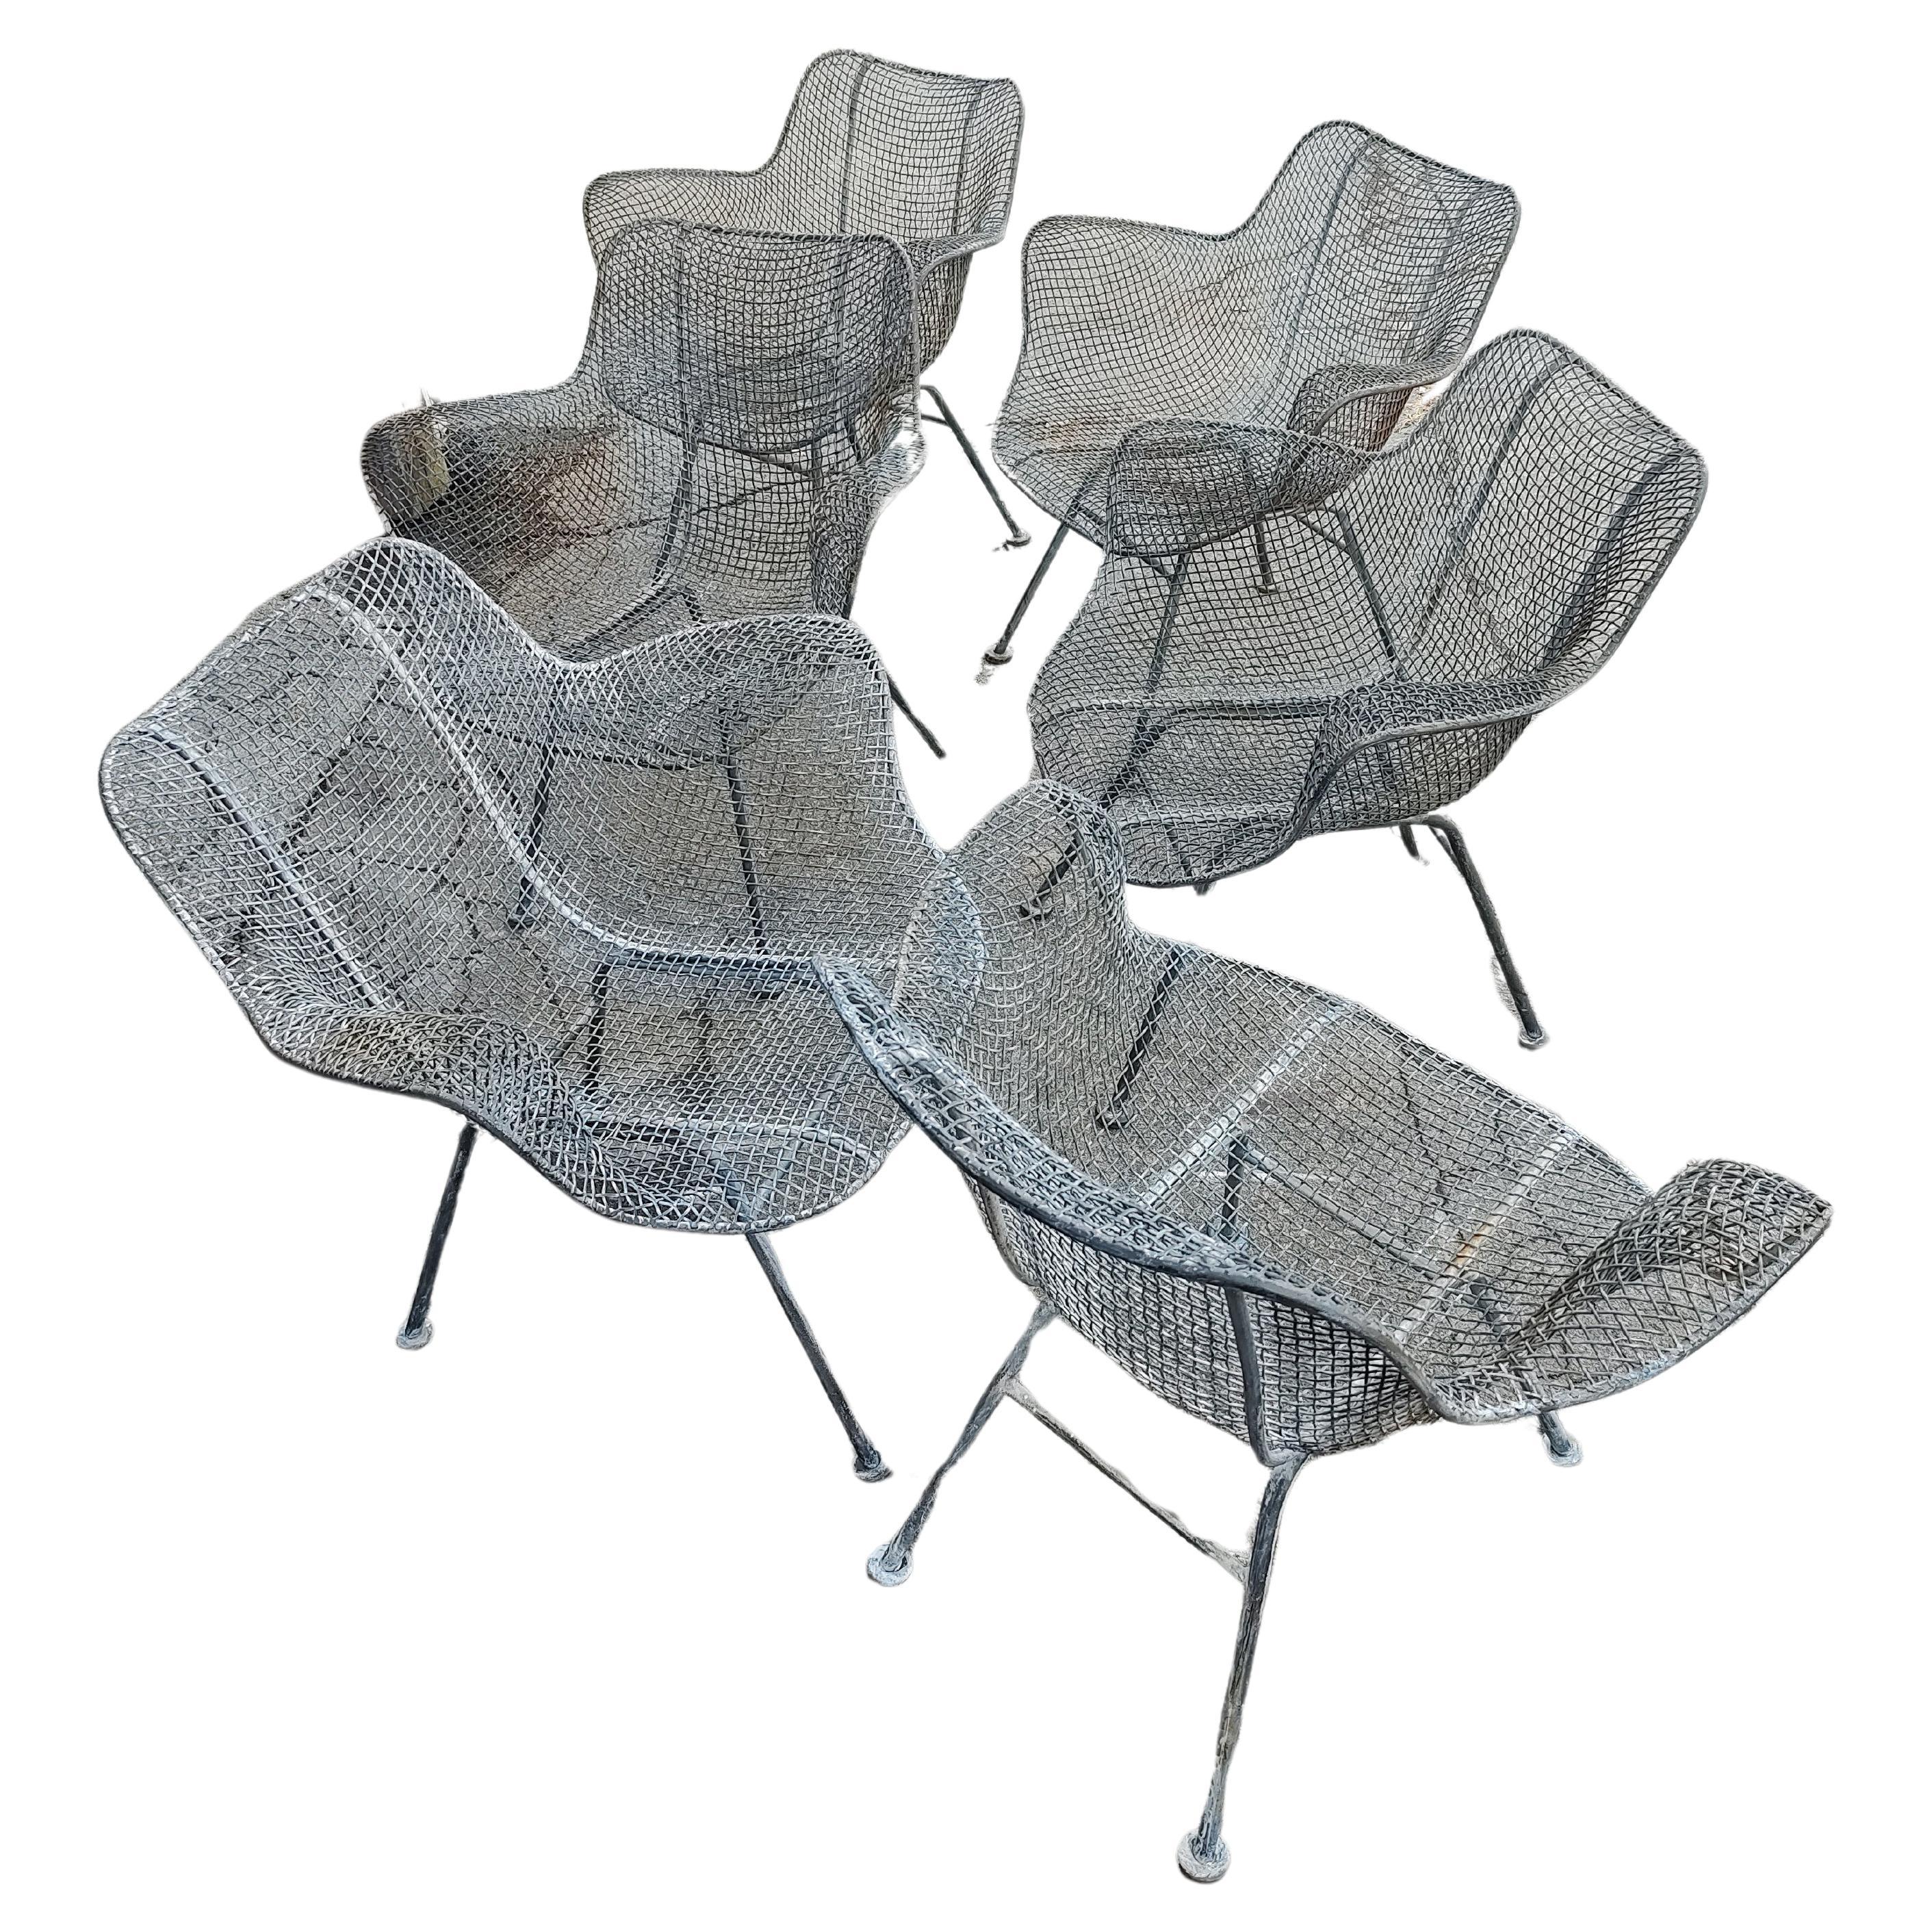 Fabulous set of six Sculptura Armchairs by Russell Woodard C1955 which were blasted free of all paint and are now in bare metal awaiting some paint. In excellent vintage condition with some surface patina, or rust. New plastic floor glides will be